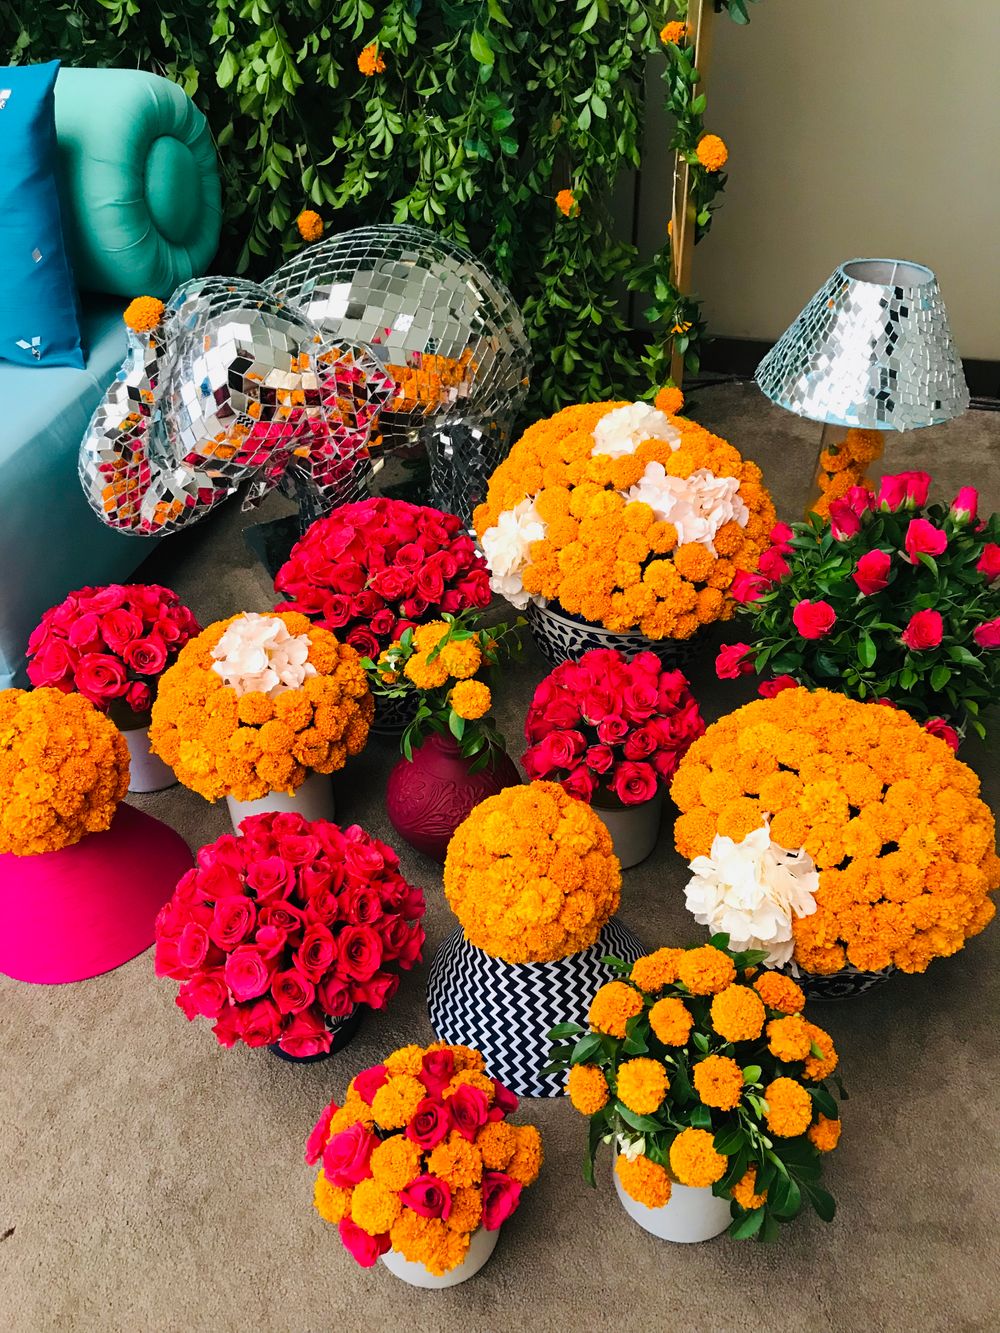 Photo of Vases filled with marigolds and red roses.